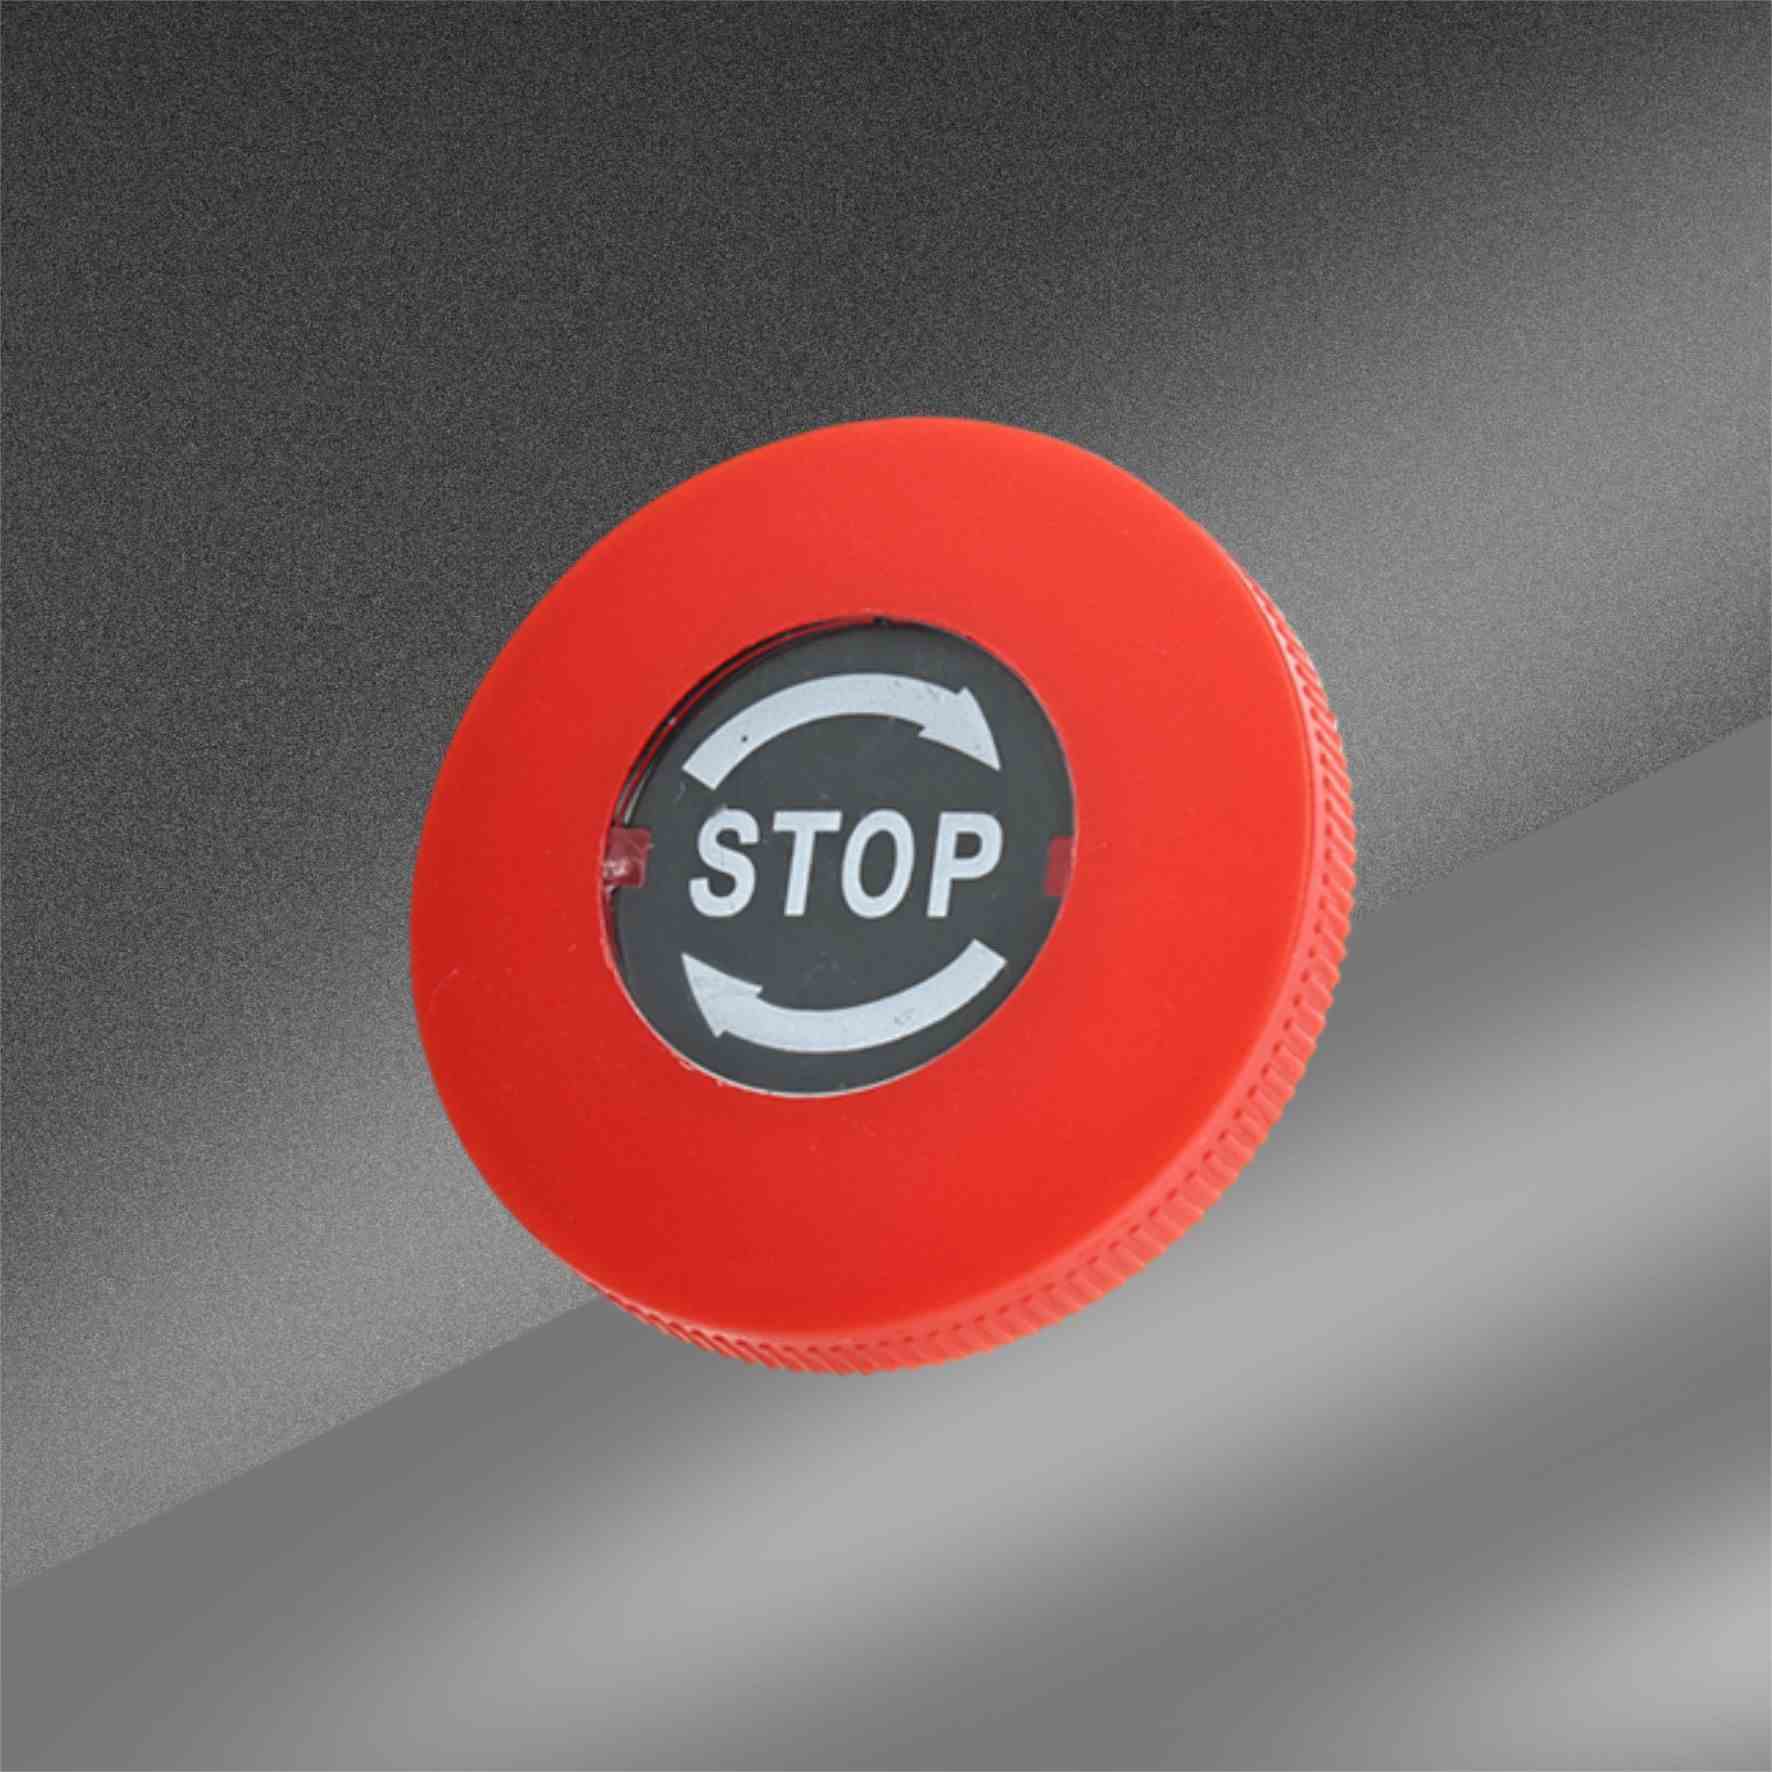 22mm 2NC Red Stop Singal 600V 10 Amp Mushroom Emergency Stop Push Button Switch button